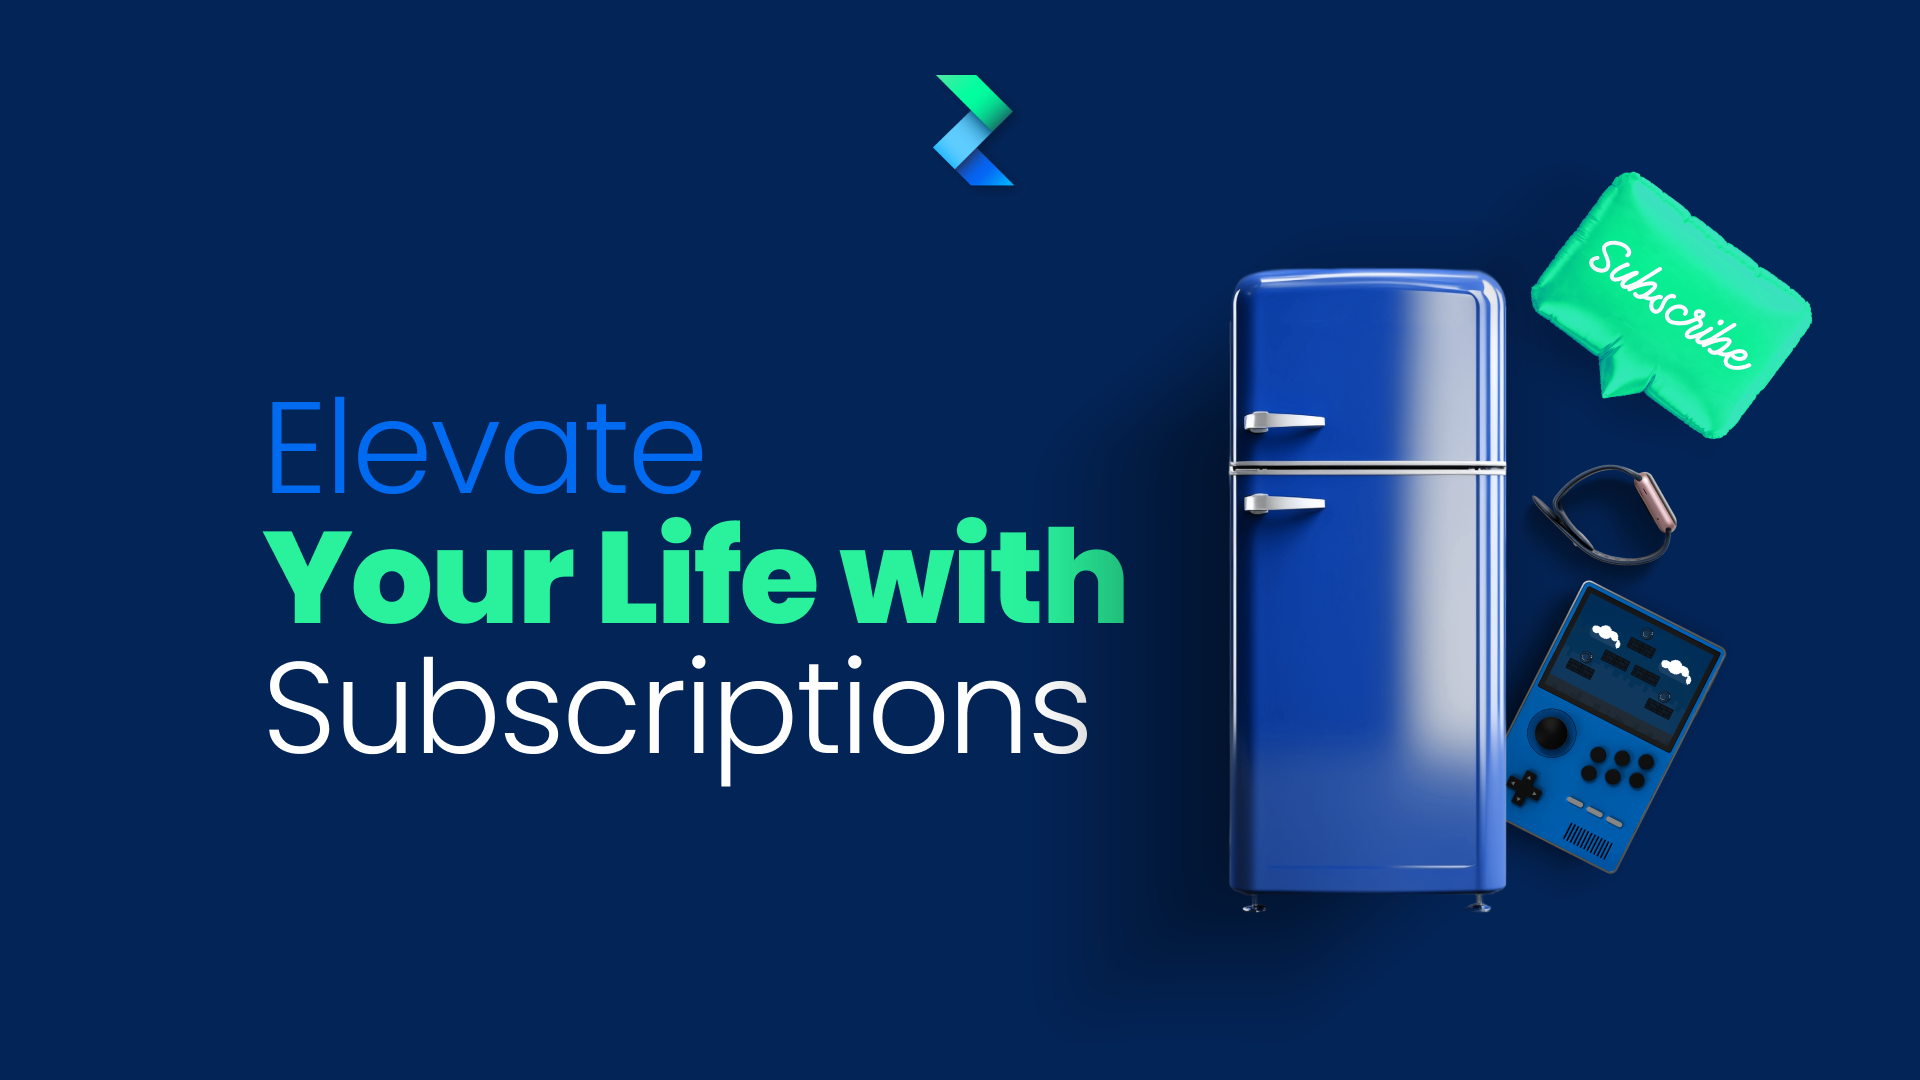 Elevate Your Life with Subscriptions